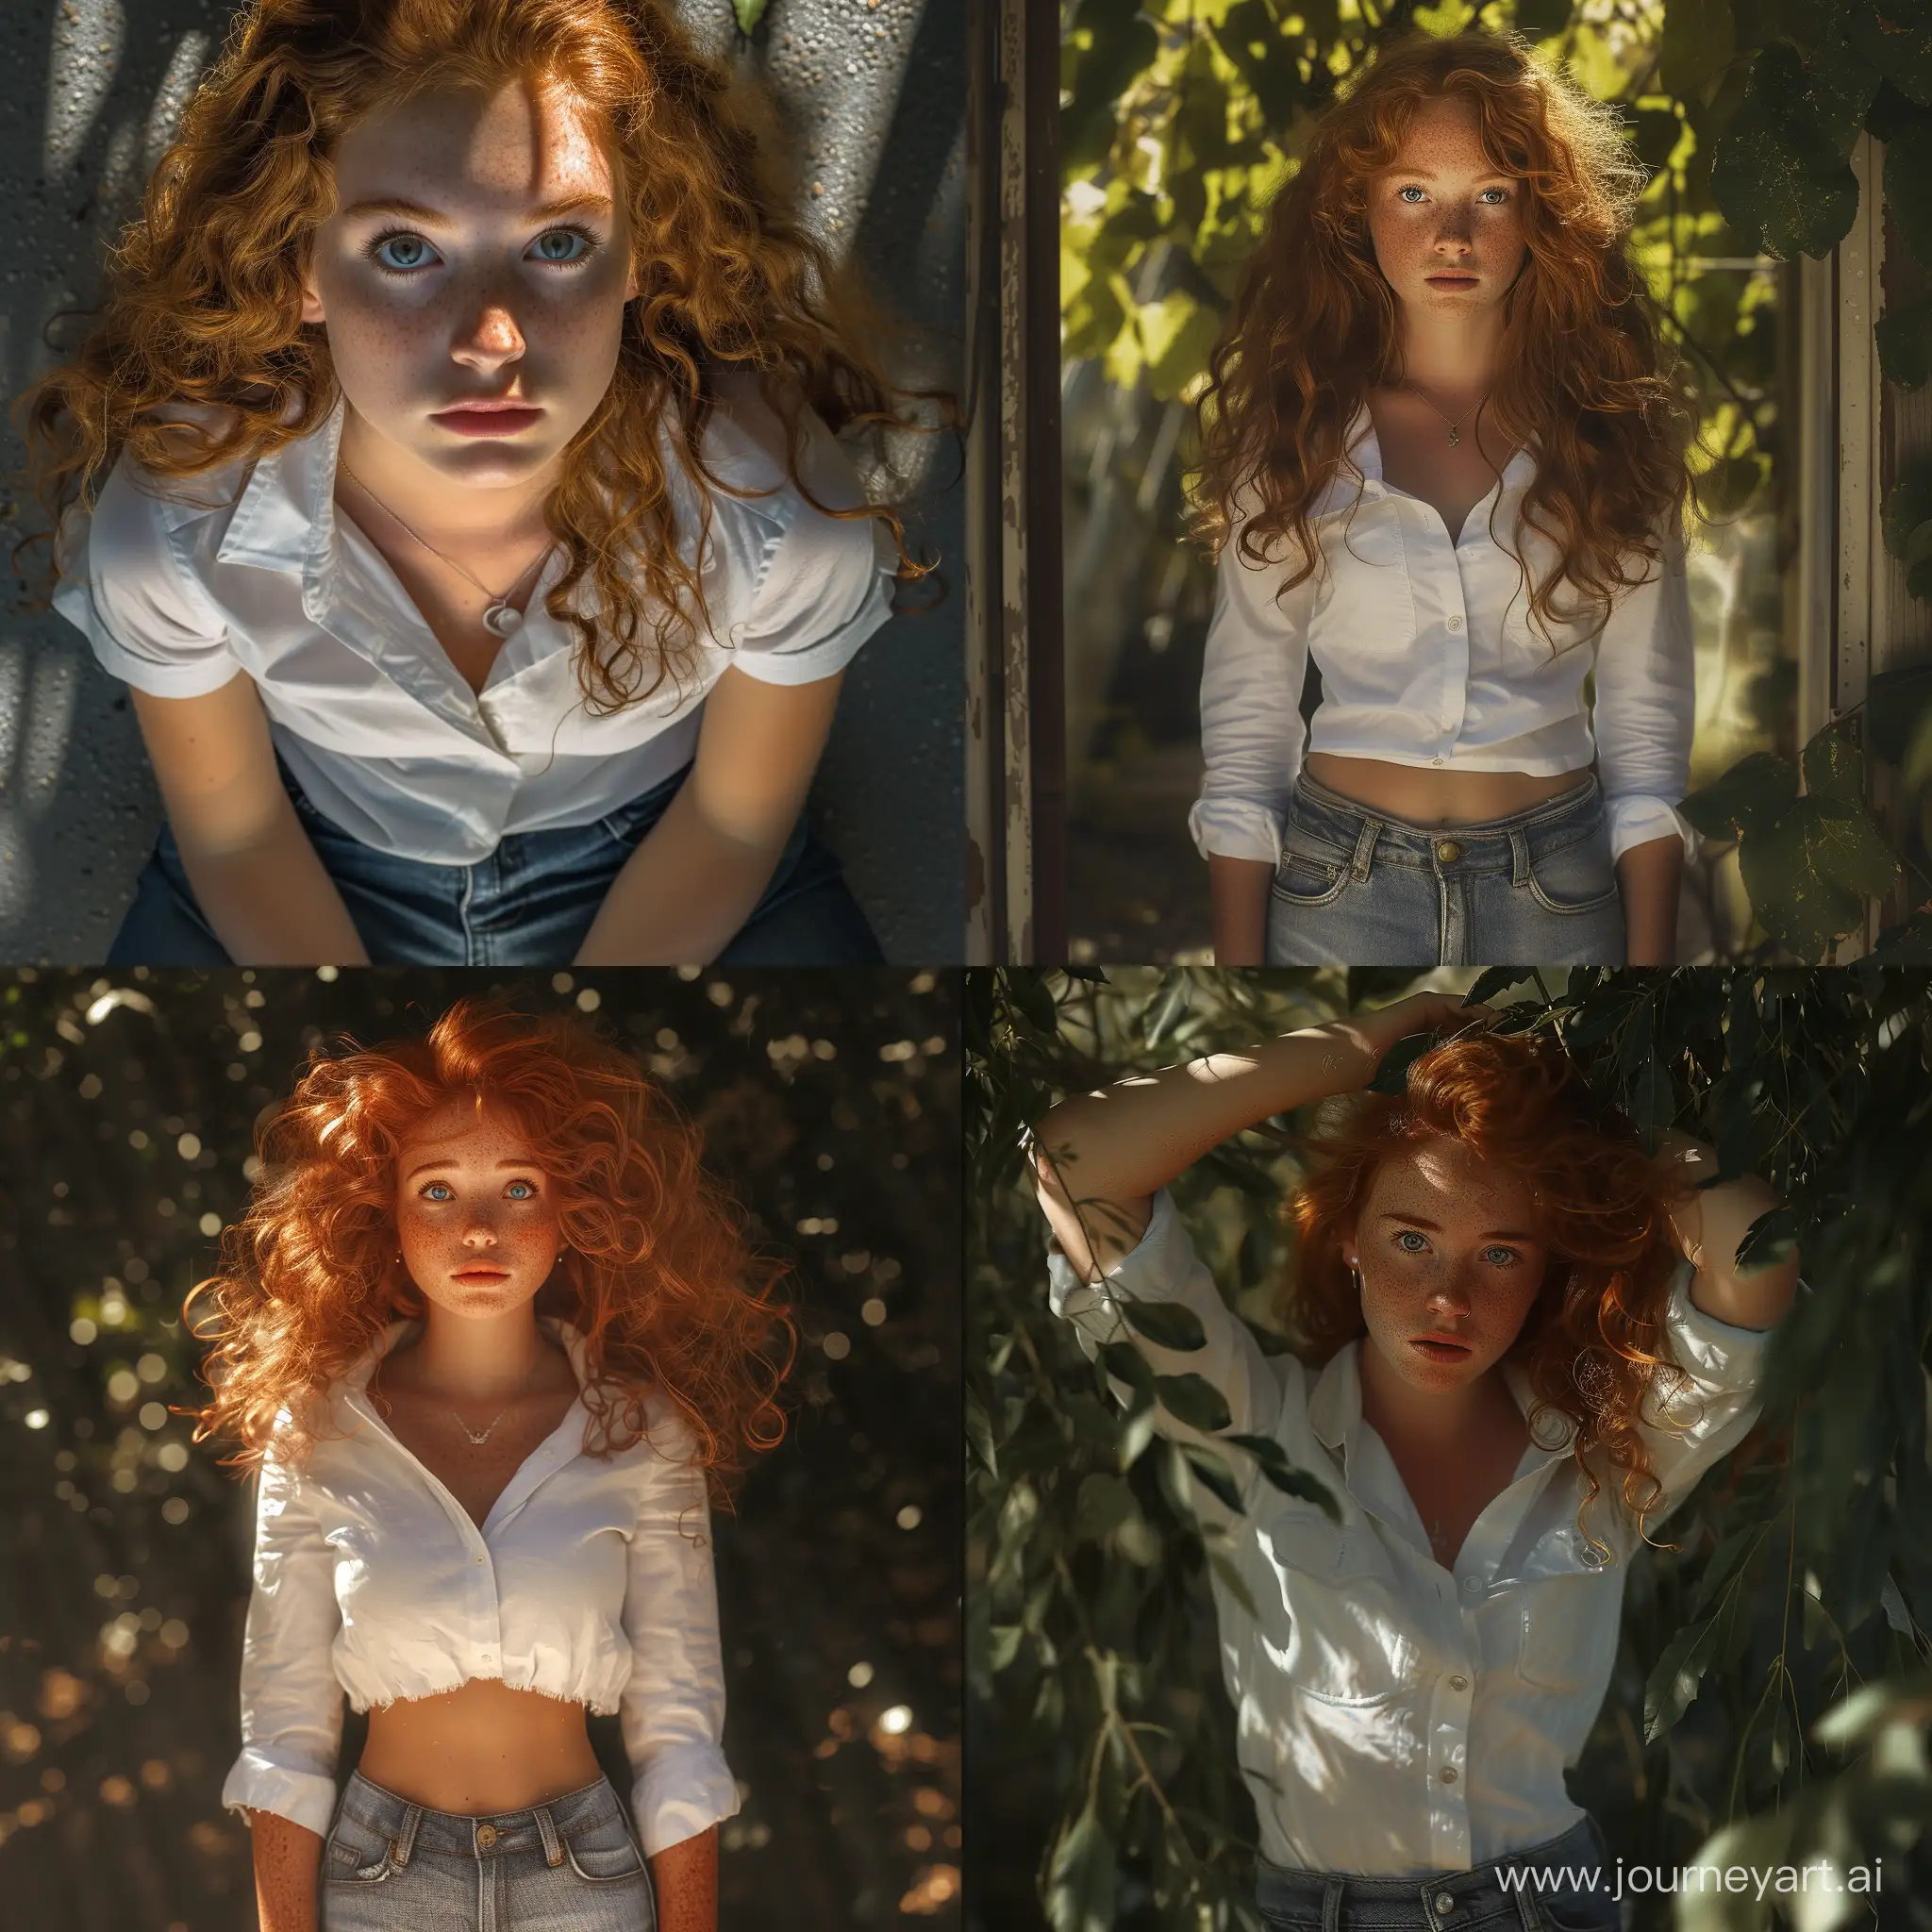 Joyful-Moments-in-Dappled-Sunlight-Redhaired-Woman-Laughing-Outdoors